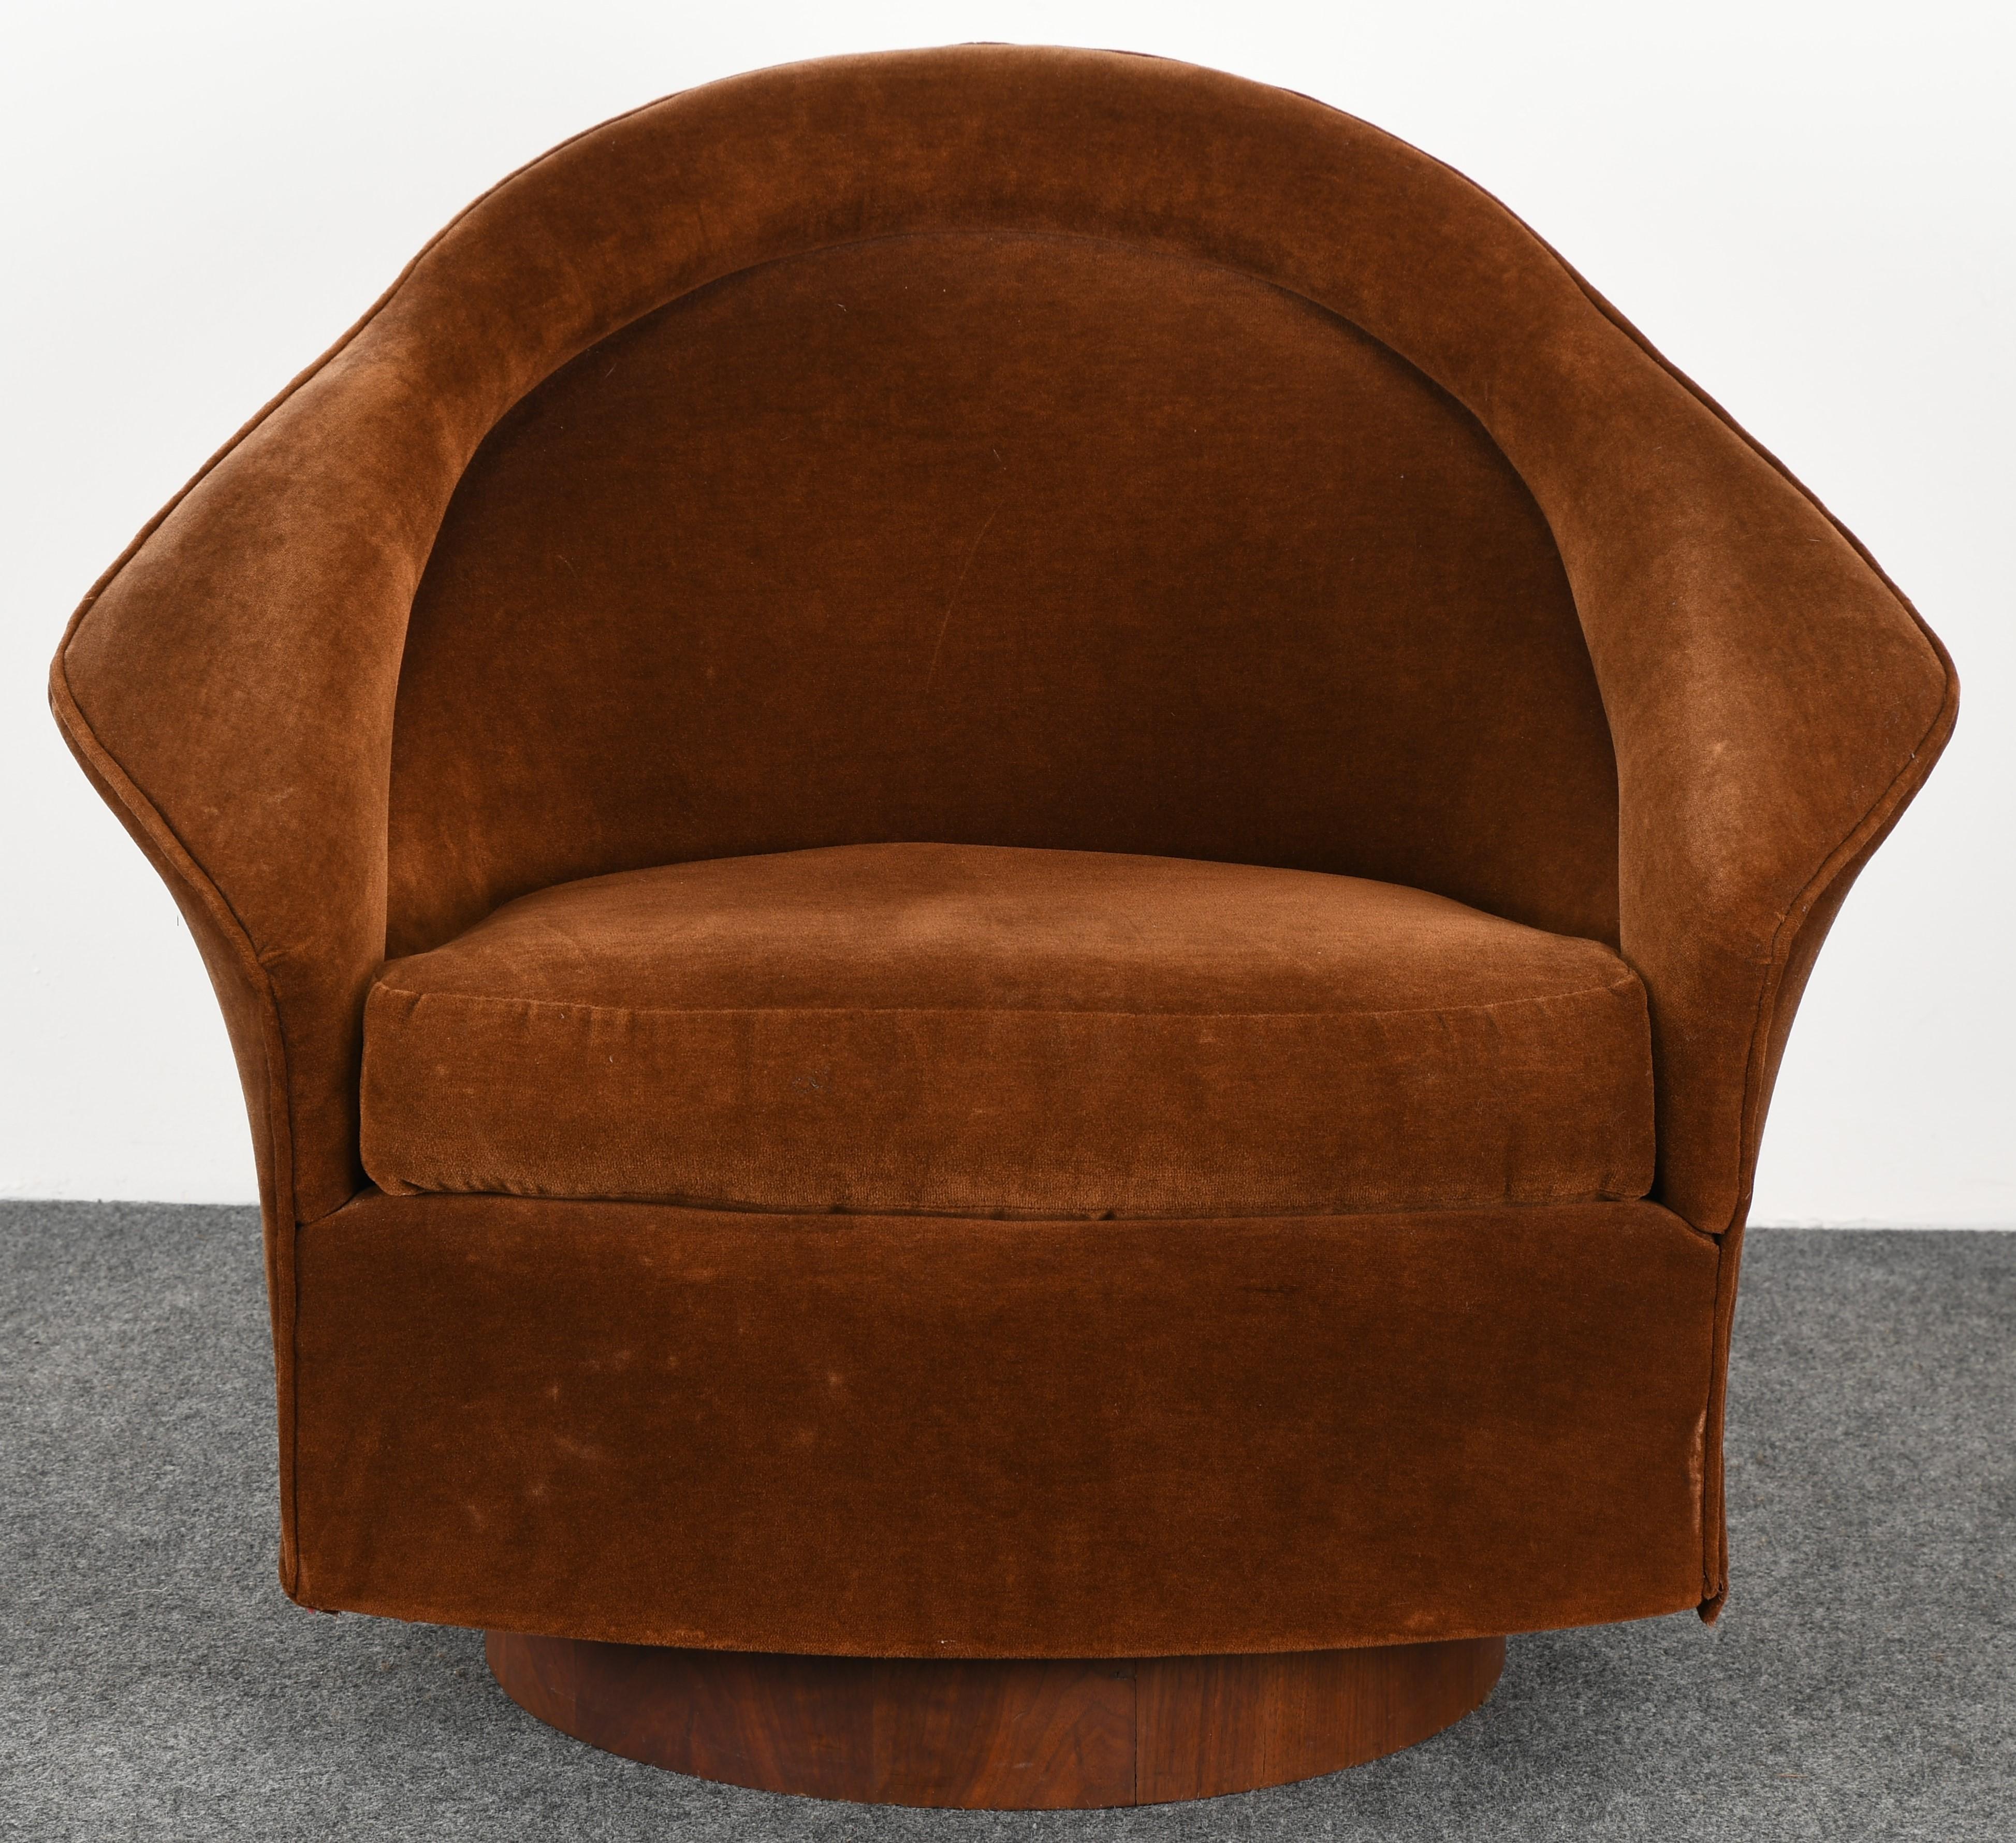 American Adrian Pearsall Swivel Chair for Craft Associates, 1960s